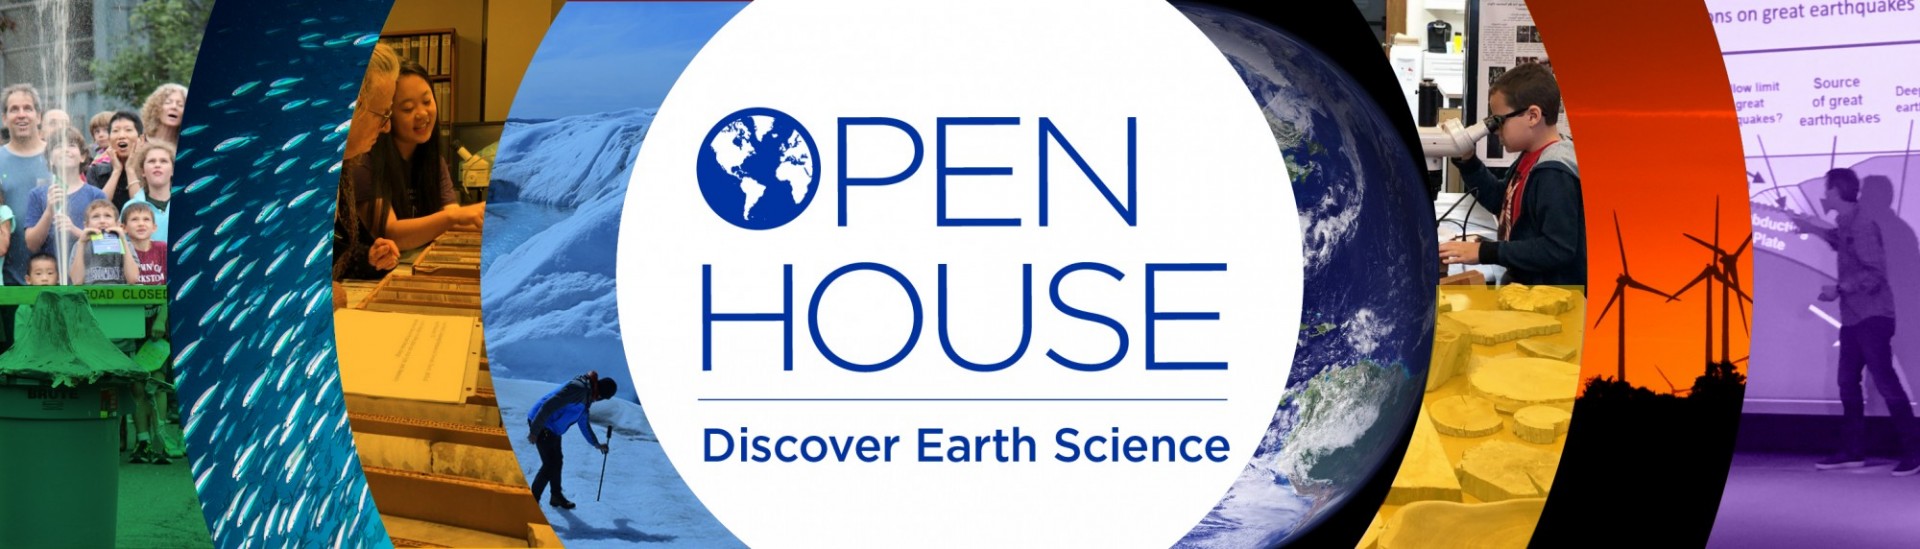 Save the Date: Open House - October 8, 2022, 10am-4pm, Lamont-Doherty Earth Observatory, 61 Route 9W, Palisades, NY